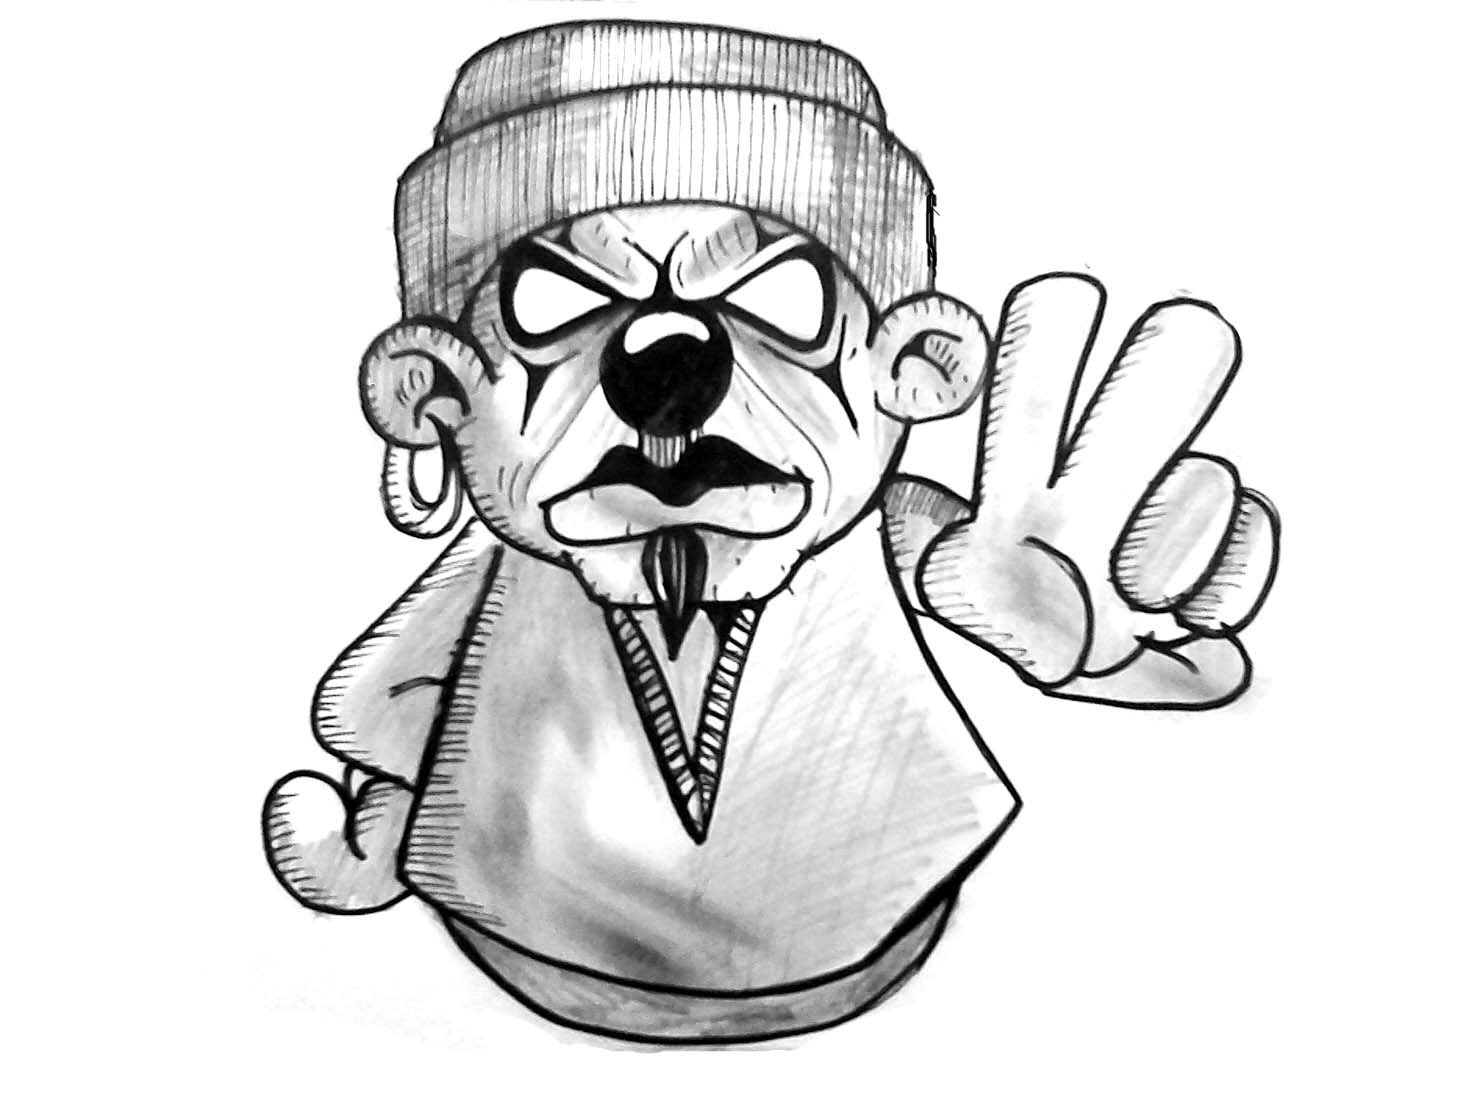 1095x1458 - Gangster mickey mouse drawing cakepins.com raiders baby pintere...